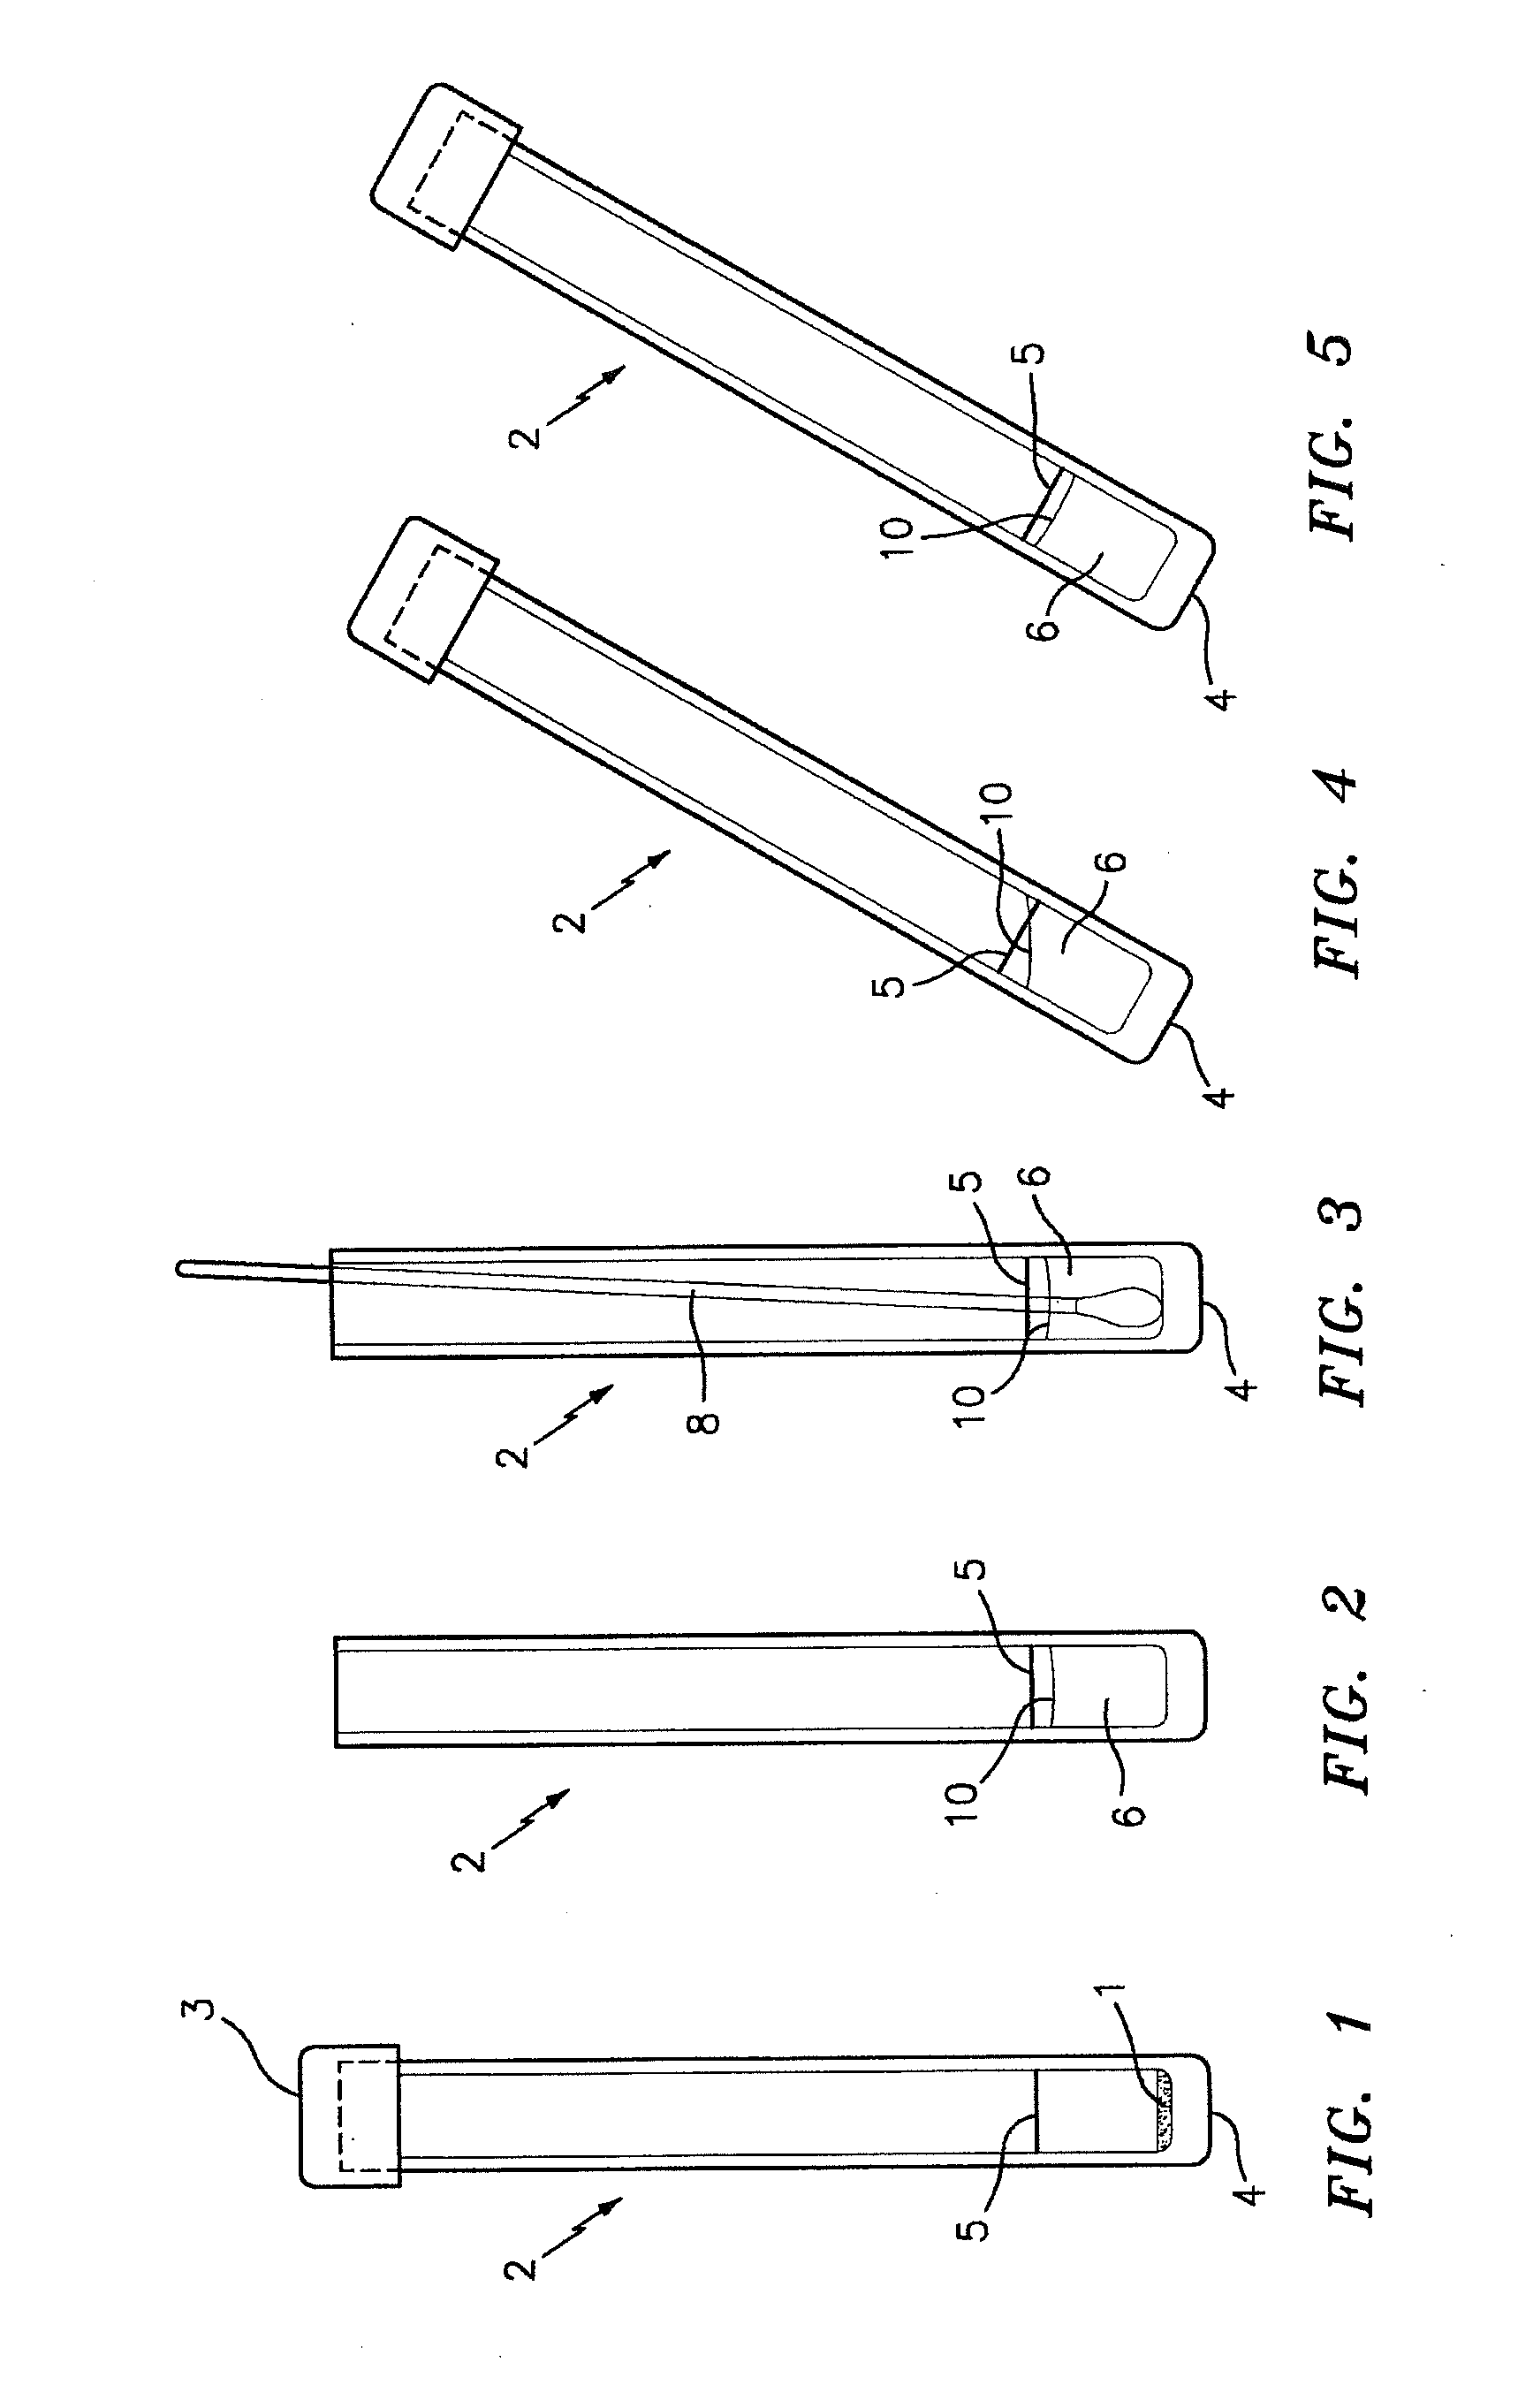 Method and medium for detecting the presence or absence of staphylococcus aureus in a test sample